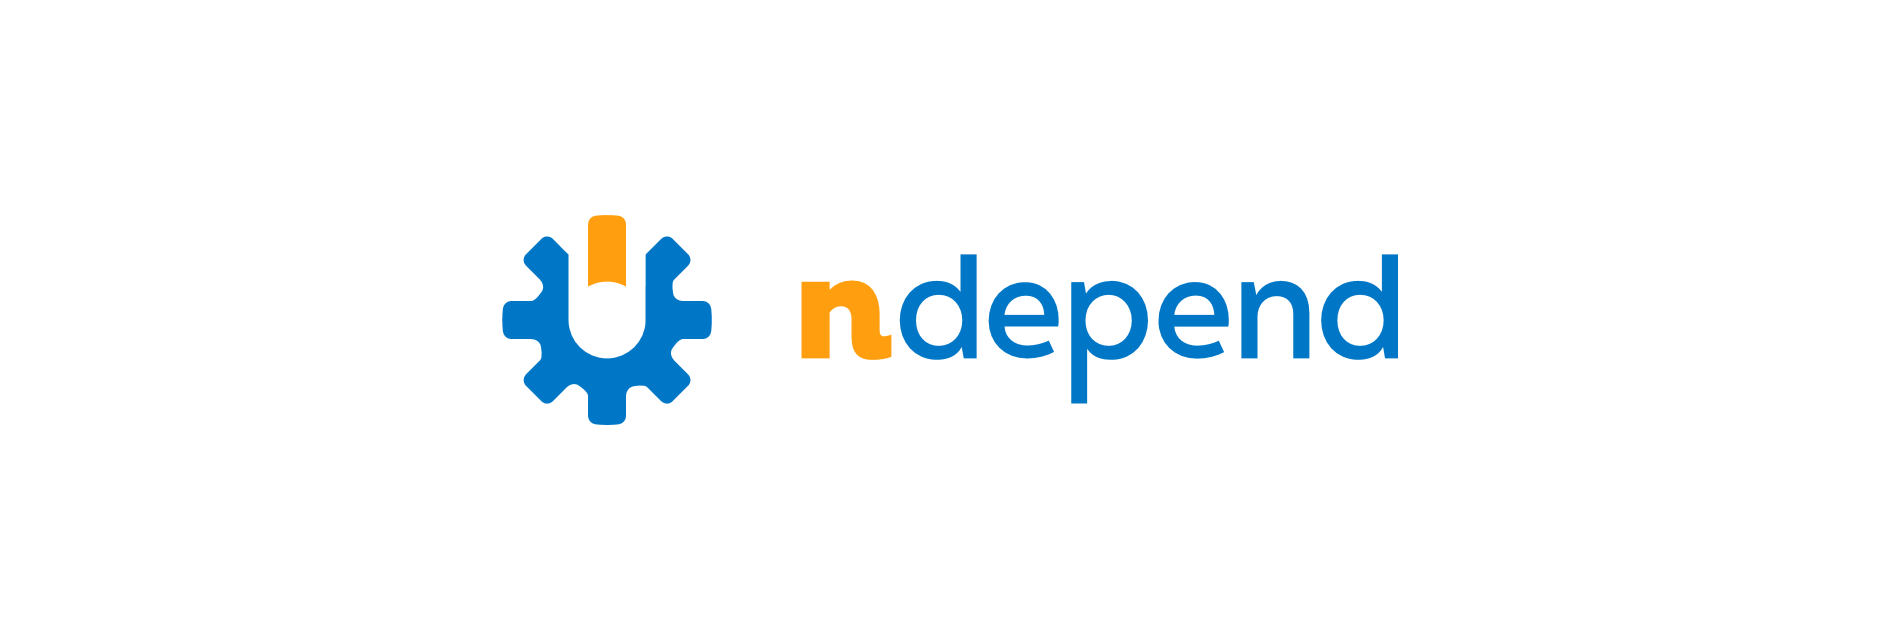 Entering the NDepend world